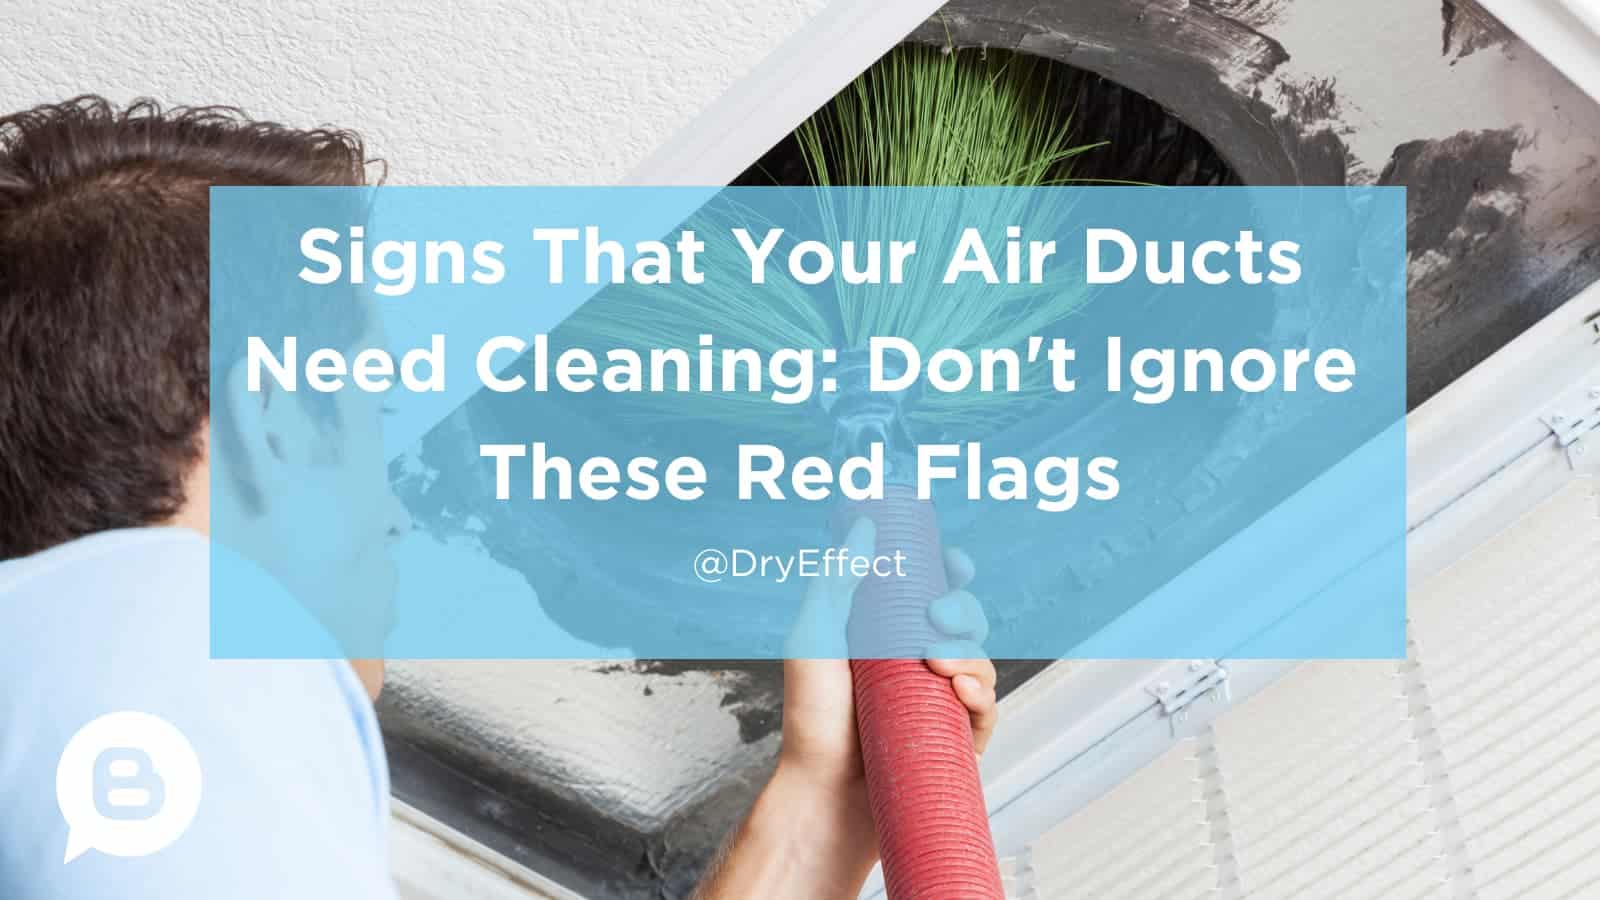 Your Air Ducts Need Cleaning: Don't Ignore These Red Flags